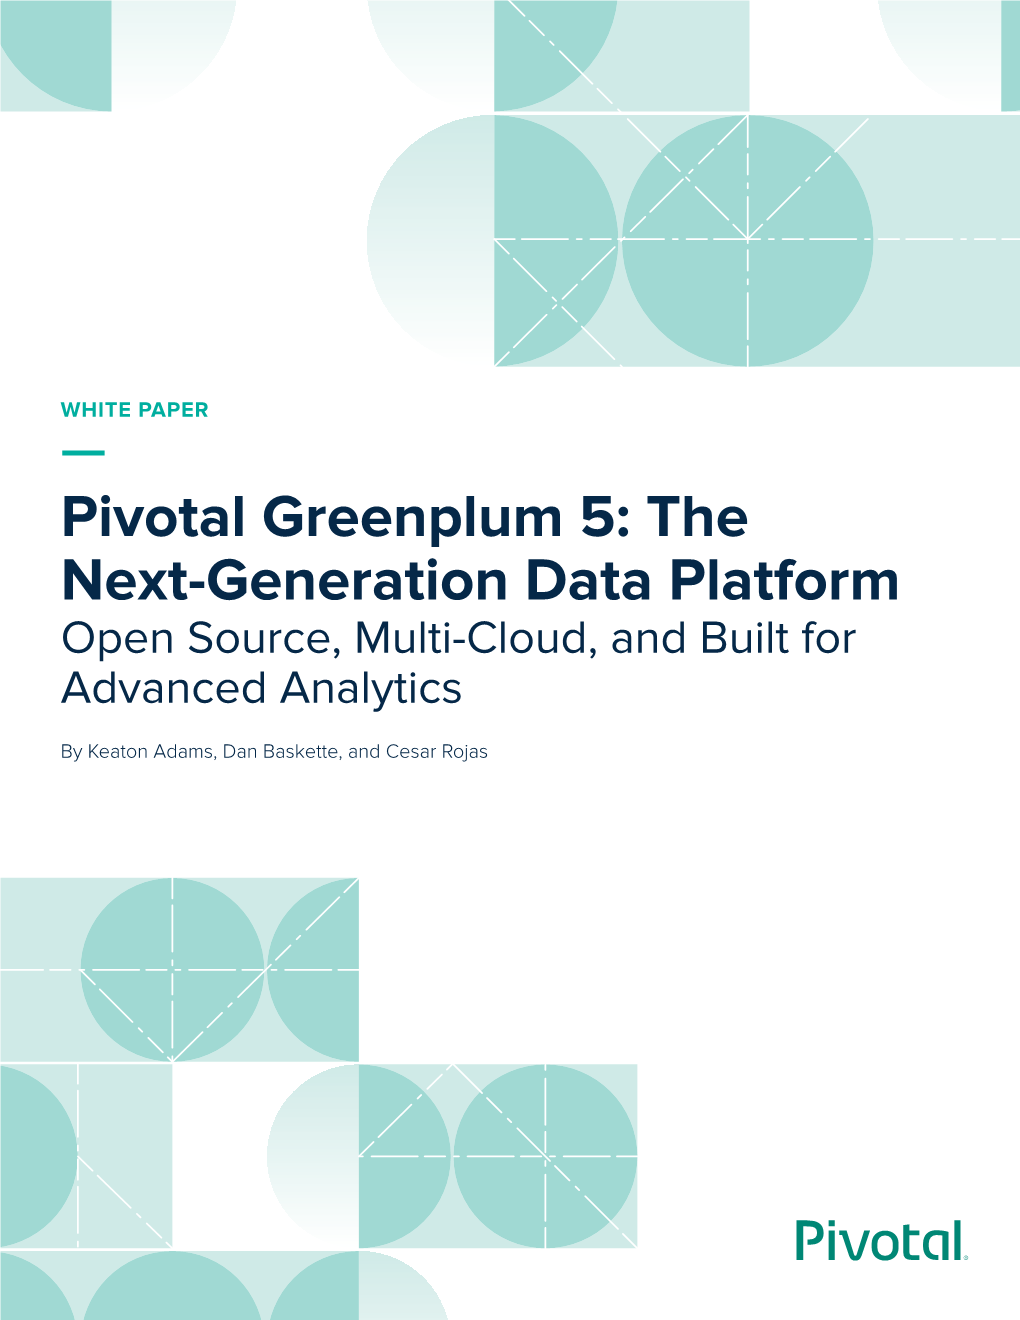 Pivotal Greenplum 5: the Next-Generation Data Platform Open Source, Multi-Cloud, and Built for Advanced Analytics